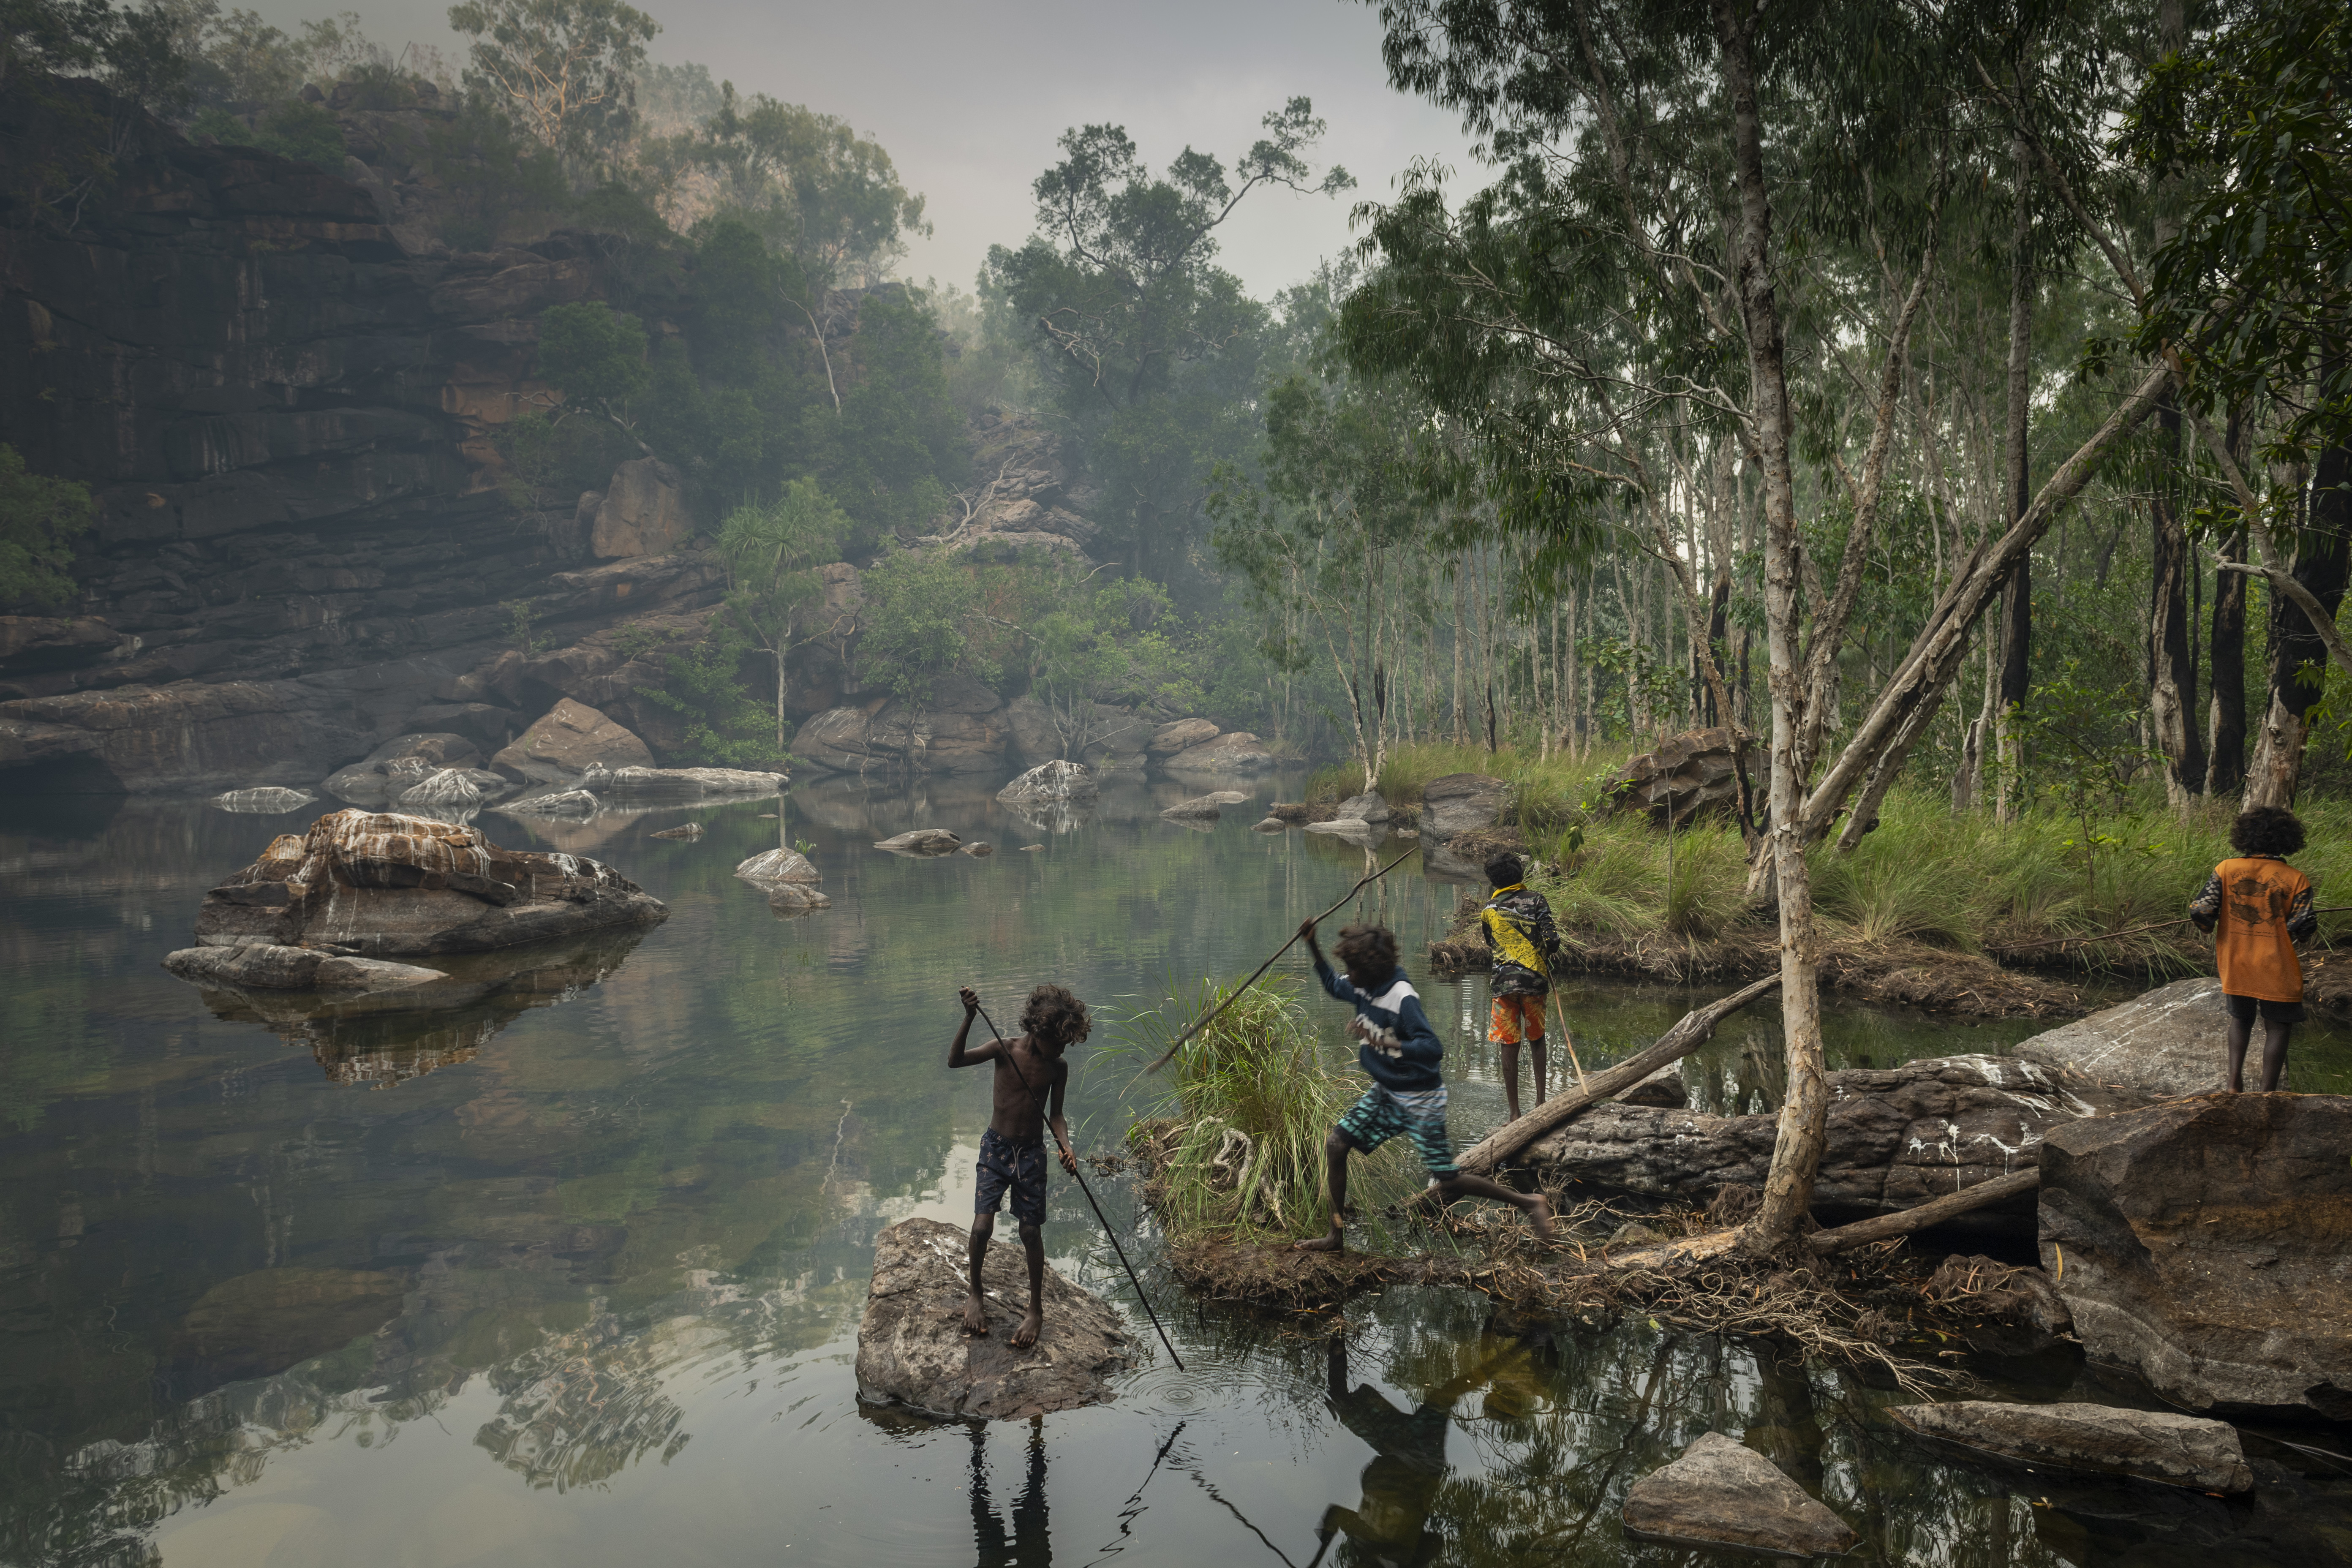 A group of children spear fish early one morning near Djulkar Waterfall, Arnhem Land, Australia, on 23 July 2021. Smoke from a fire that was lit the previous day still hangs in the air.